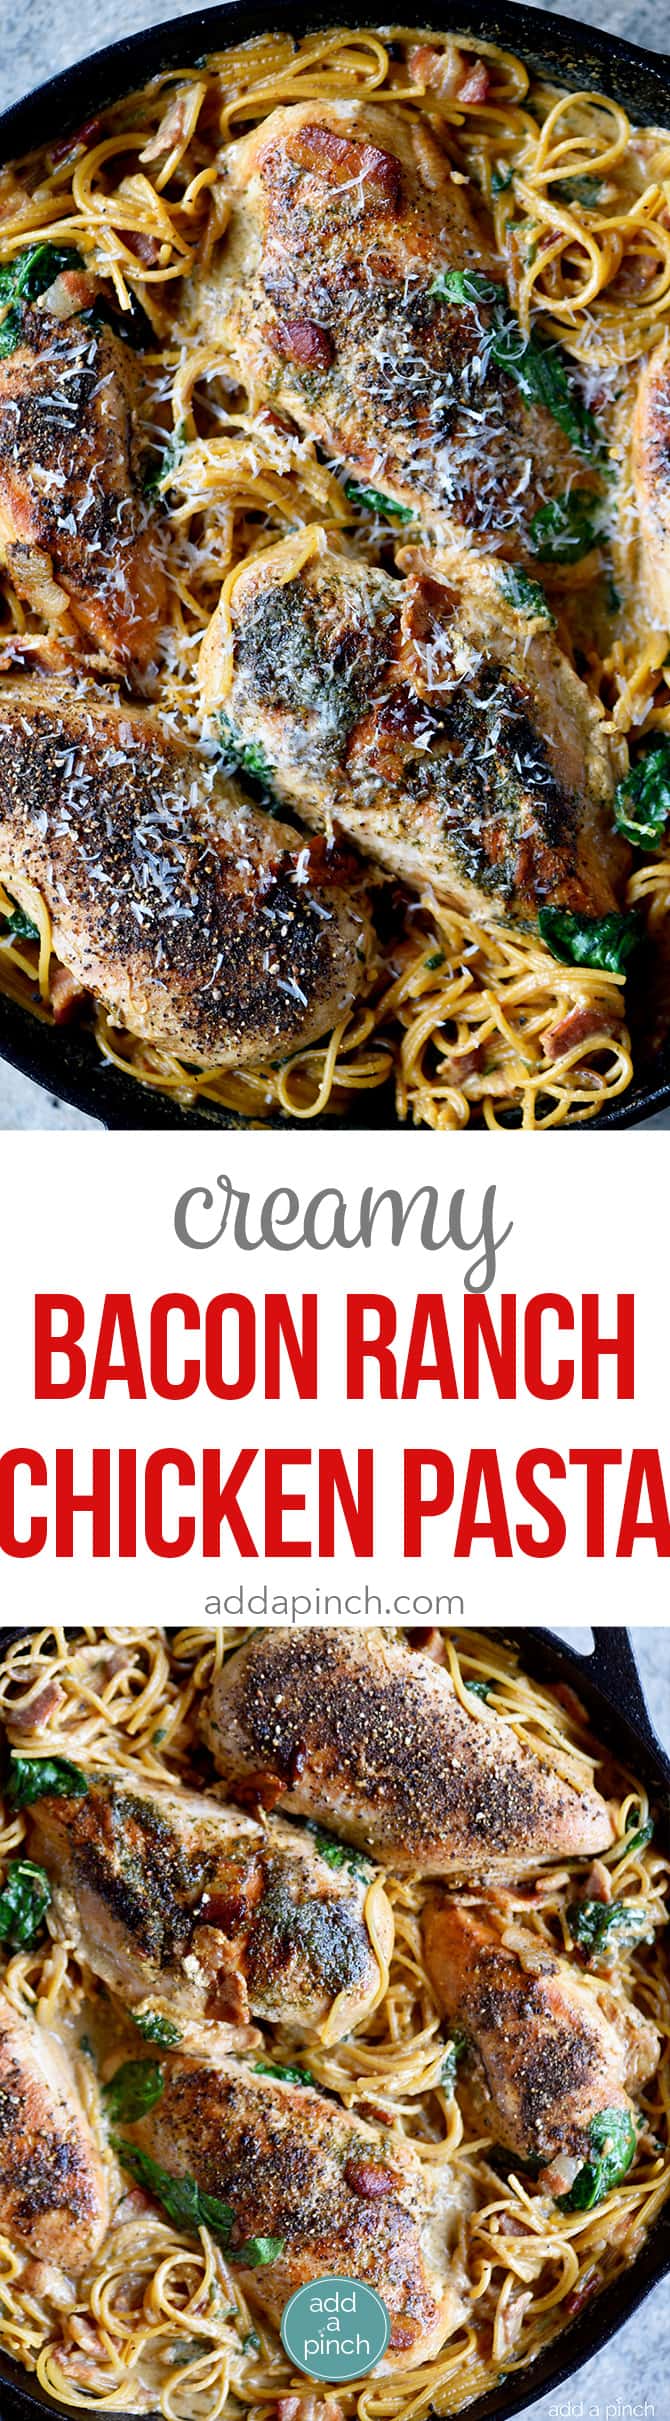 This Creamy Bacon Ranch Chicken Pasta recipe is a quick and easy recipe where everything cooks in one skillet! A family weeknight favorite! // addapinch.com